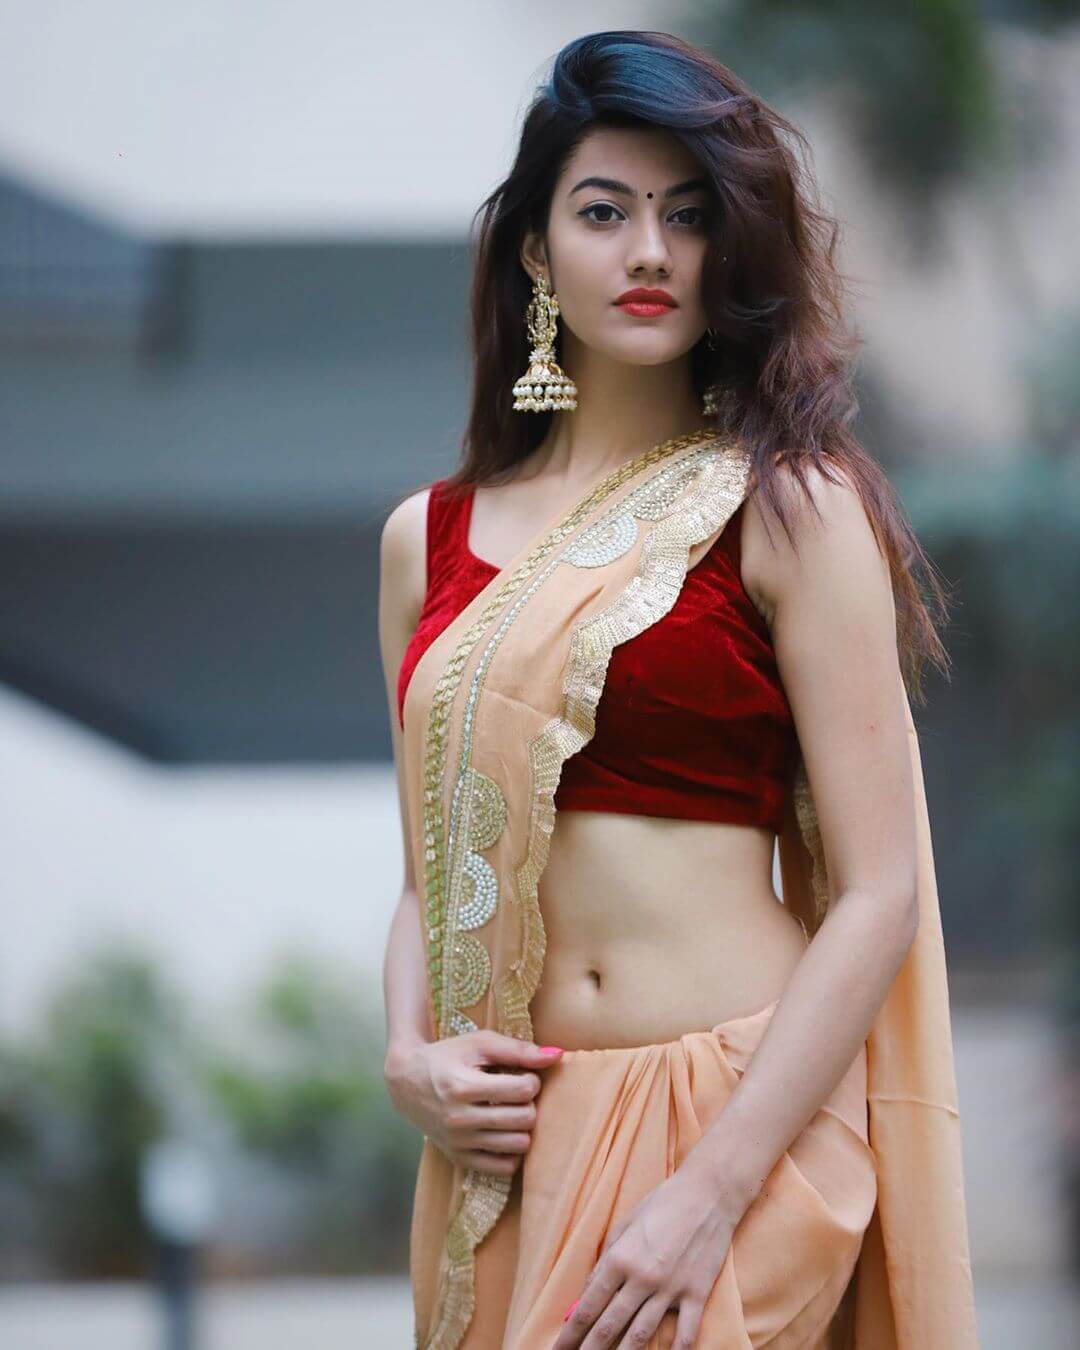 Hot indian pictures